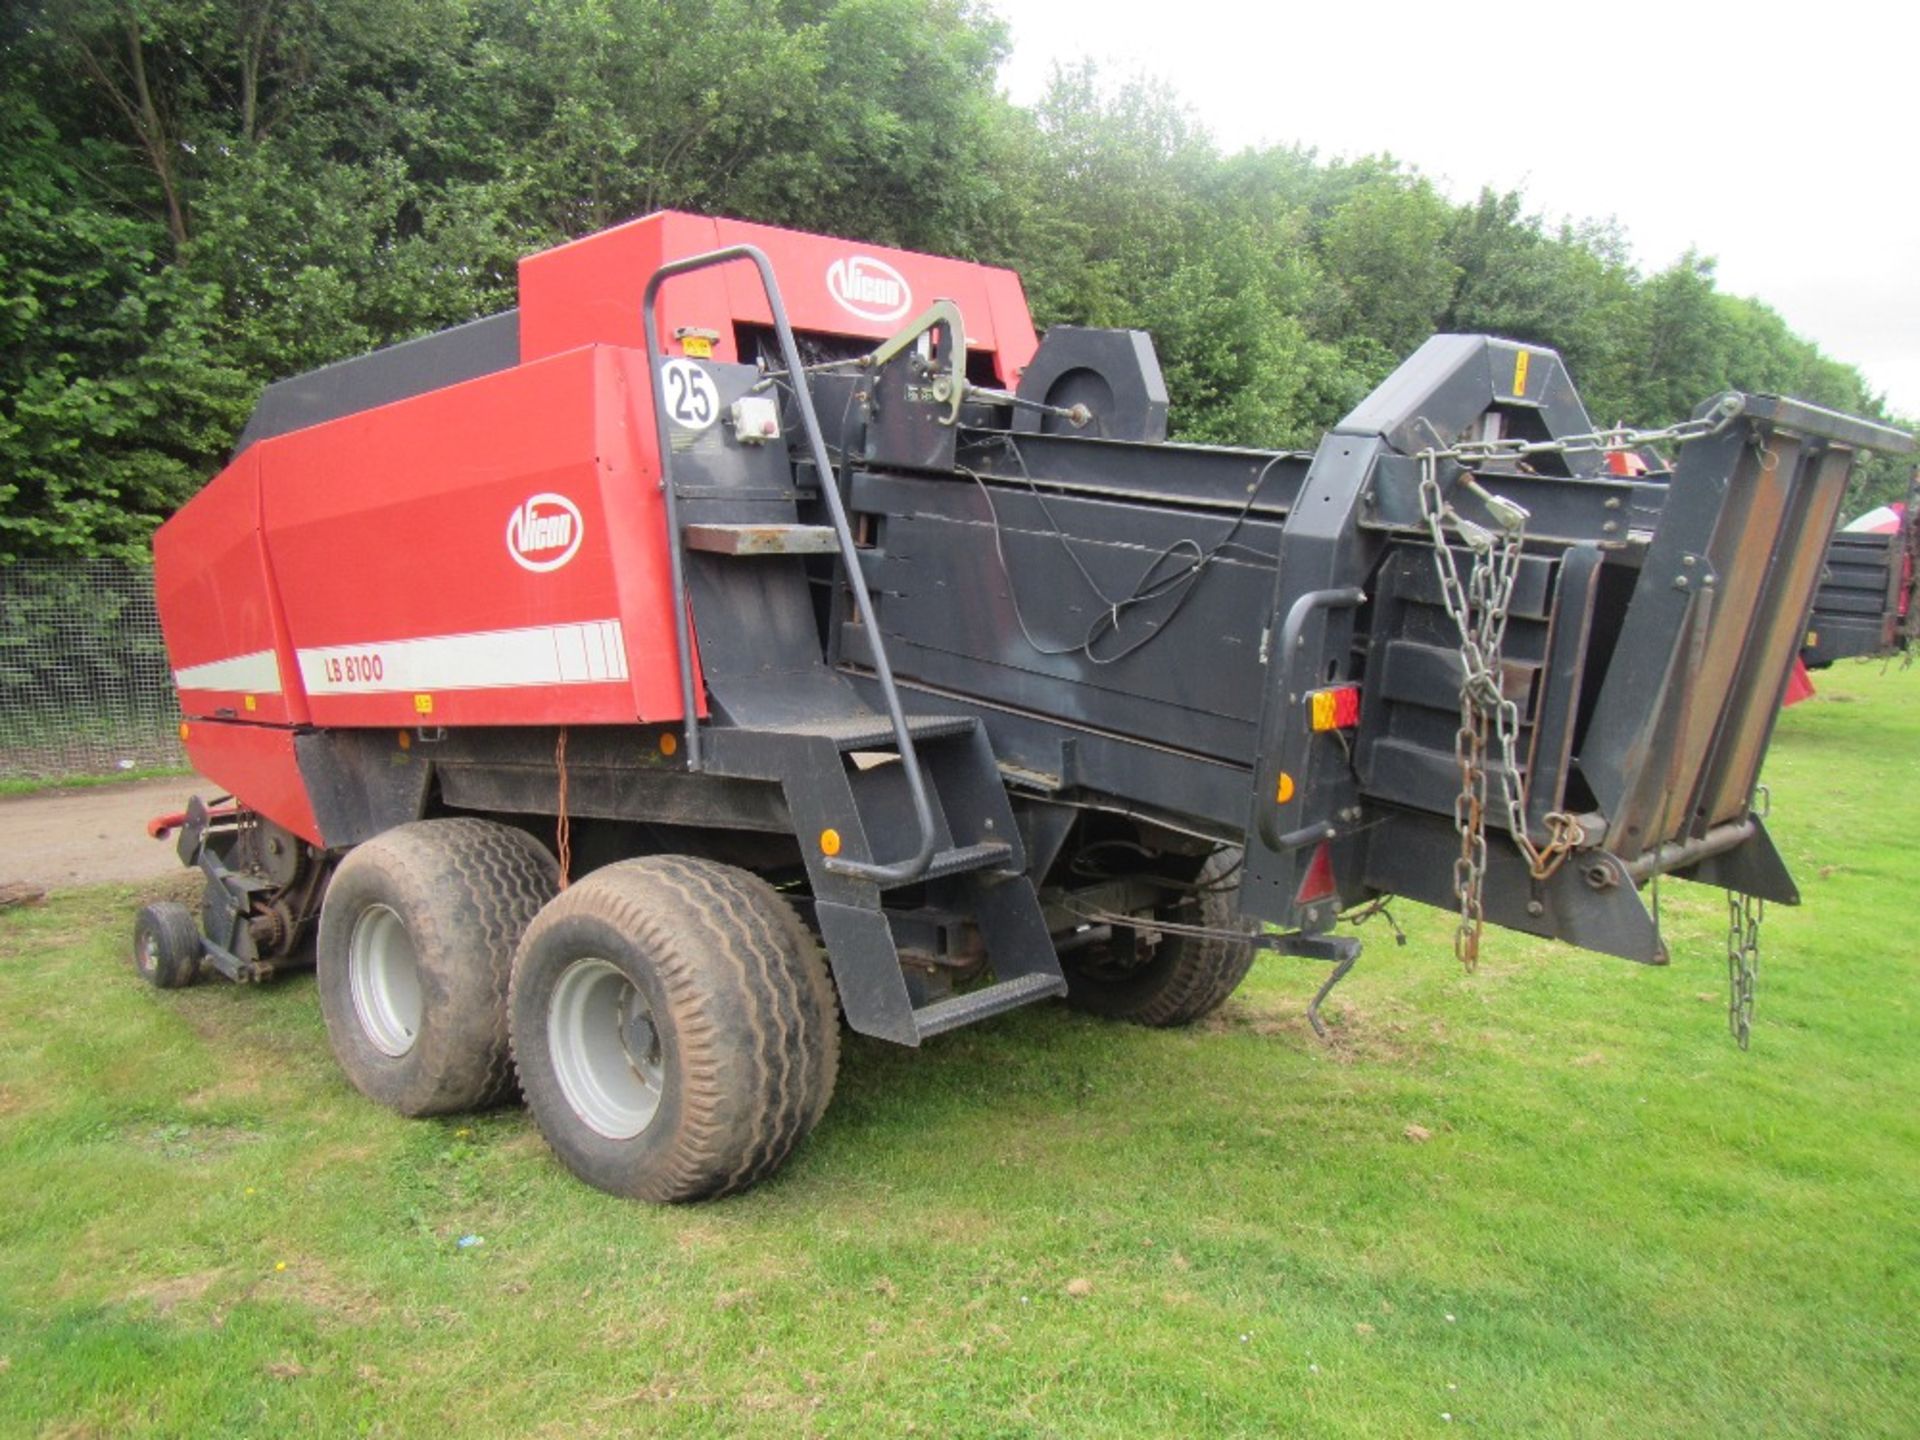 2002 Vicon LB 8100 Square Baler 80x70 bales, tandem axle with brakes, sprung suspension, fast tow, - Image 3 of 6